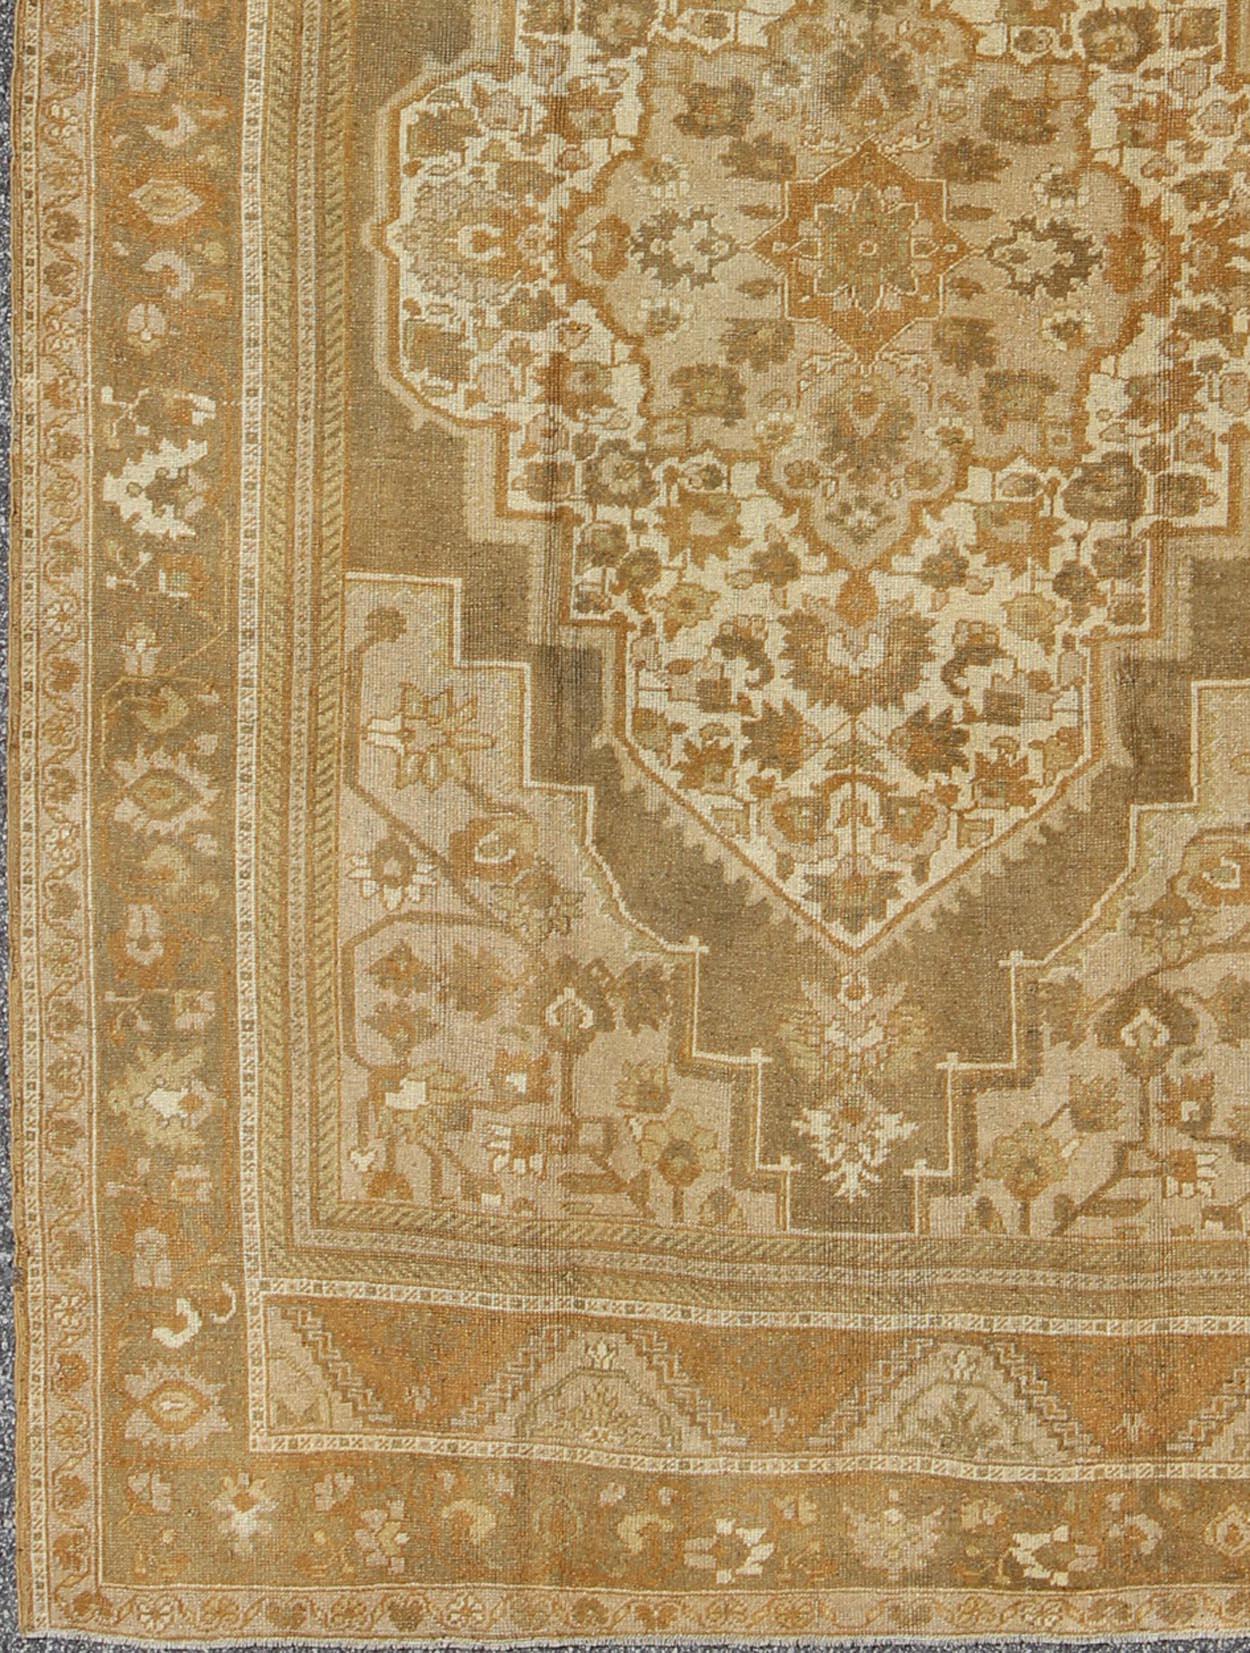 Measures 6'5 x 9'7 

This vintage Turkish Oushak carpet, (circa mid-20th century) features a floral central medallion design, as well as patterns of smaller tribal elements in the four cornices, and in the surrounding borders. Colors include